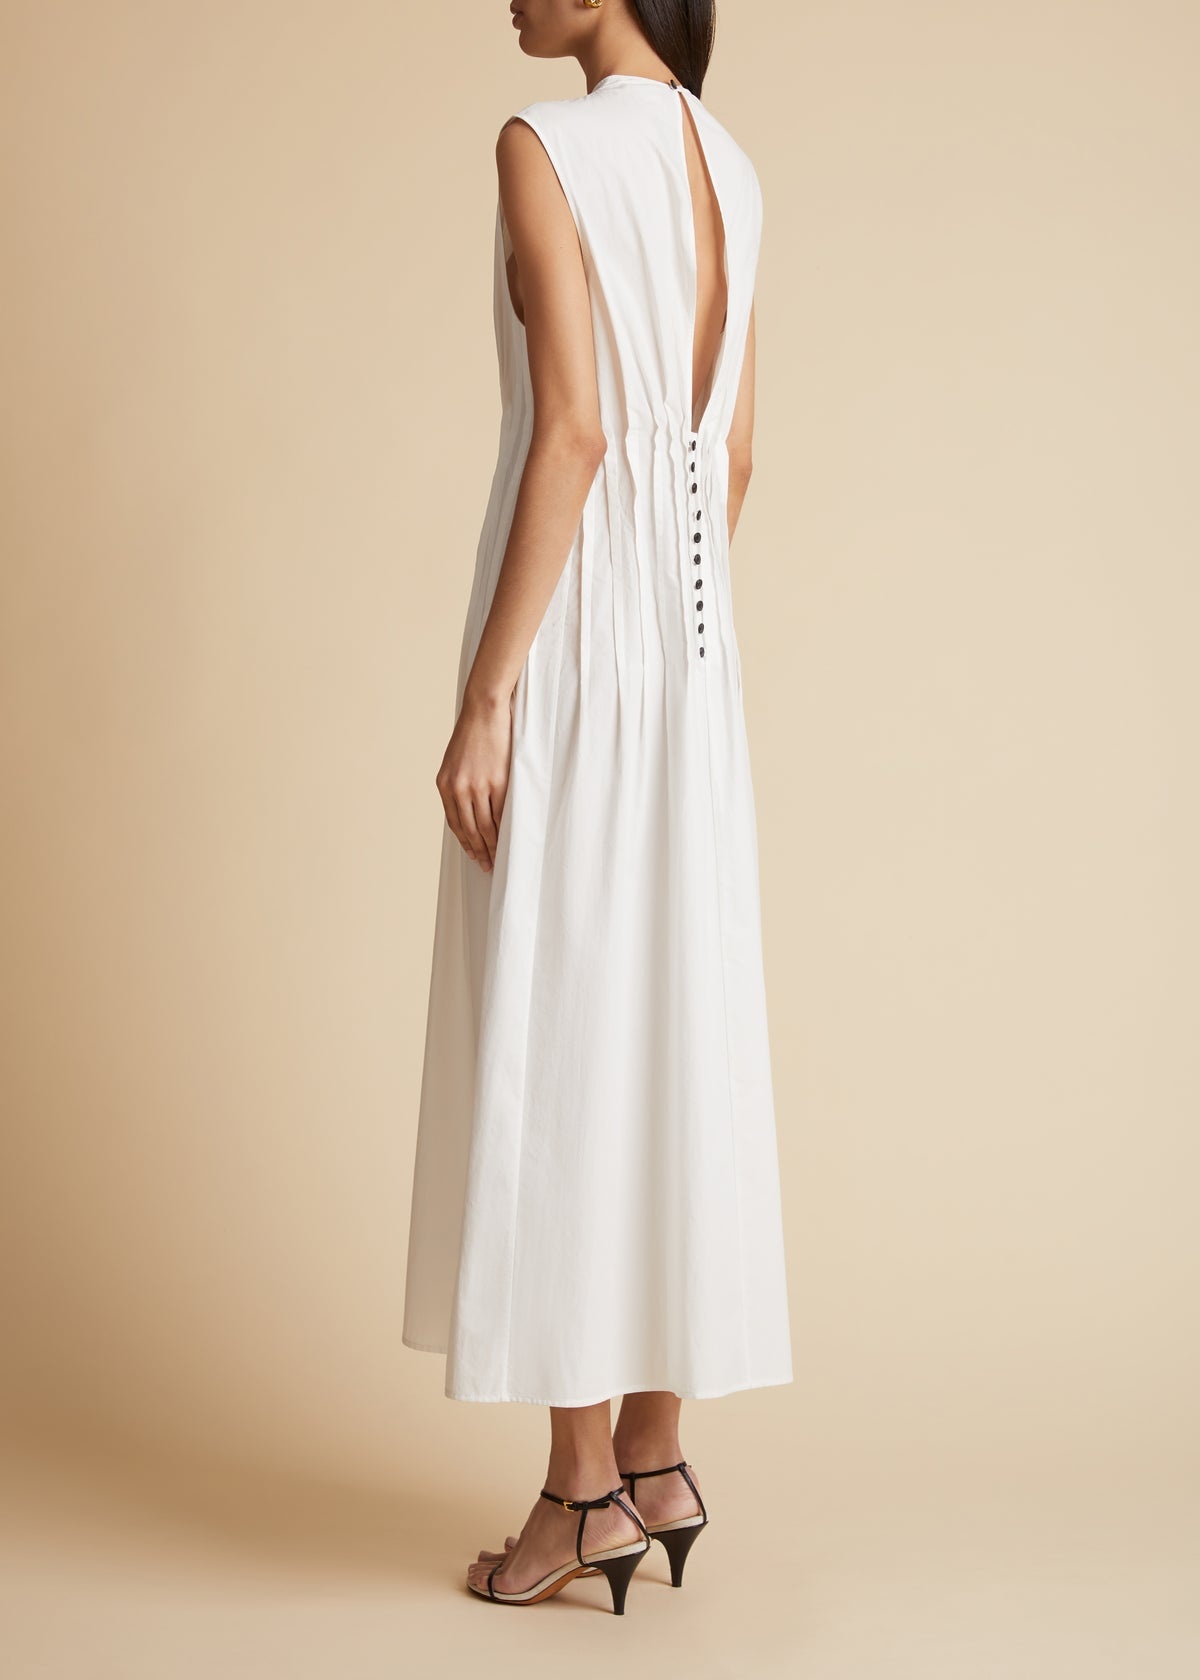 The Wes Dress in White - 3